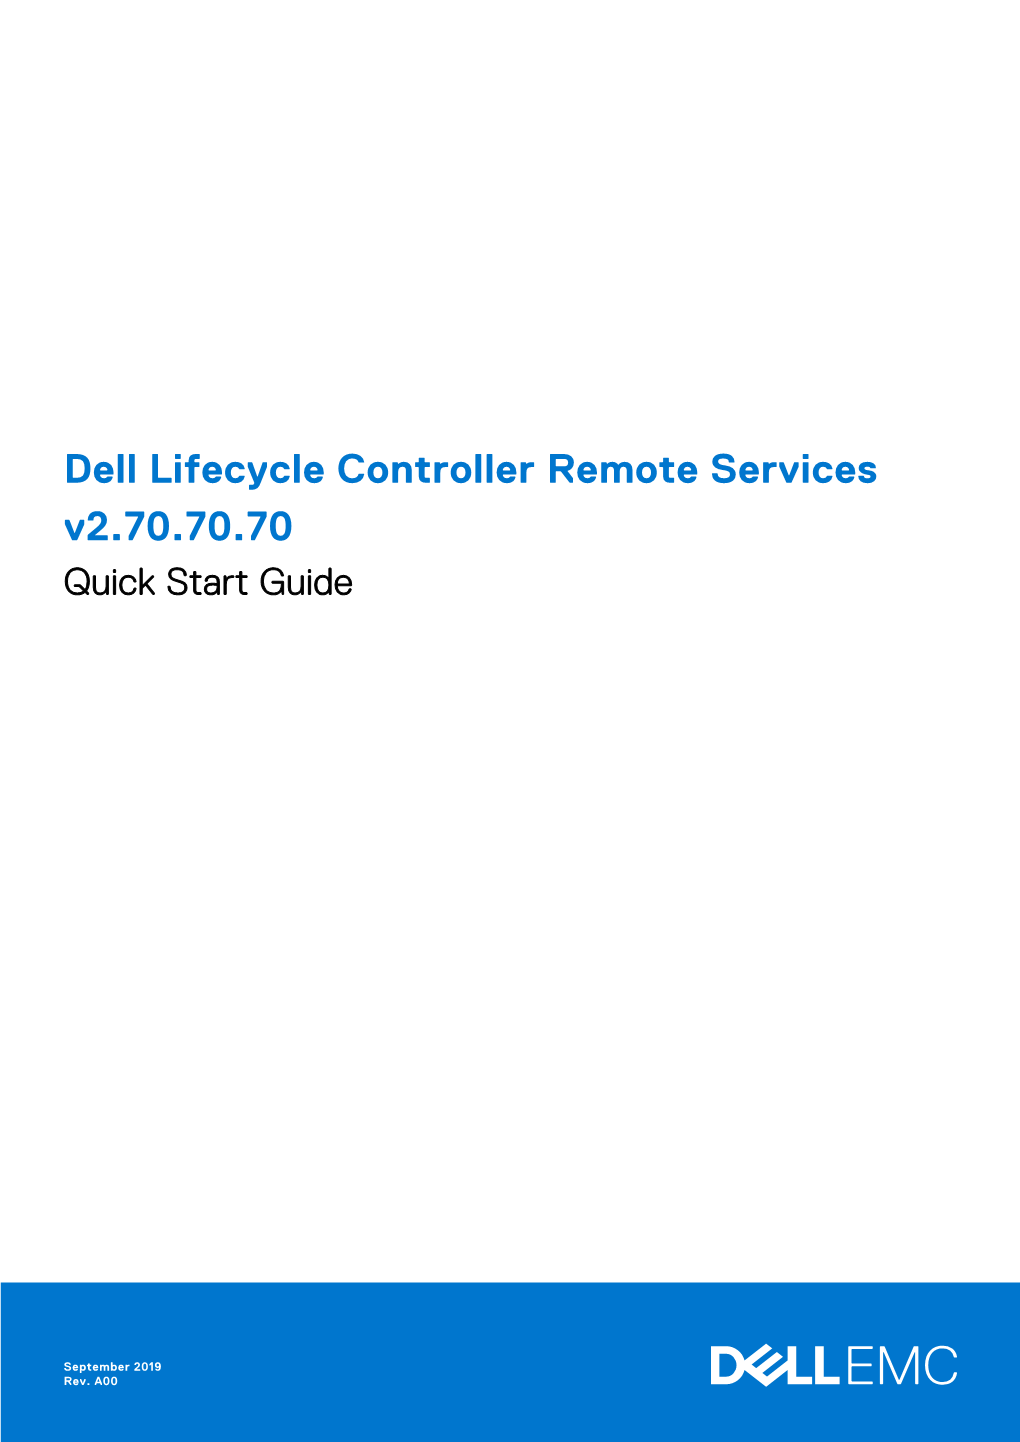 Dell Lifecycle Controller Remote Services V2.70.70.70 Quick Start Guide